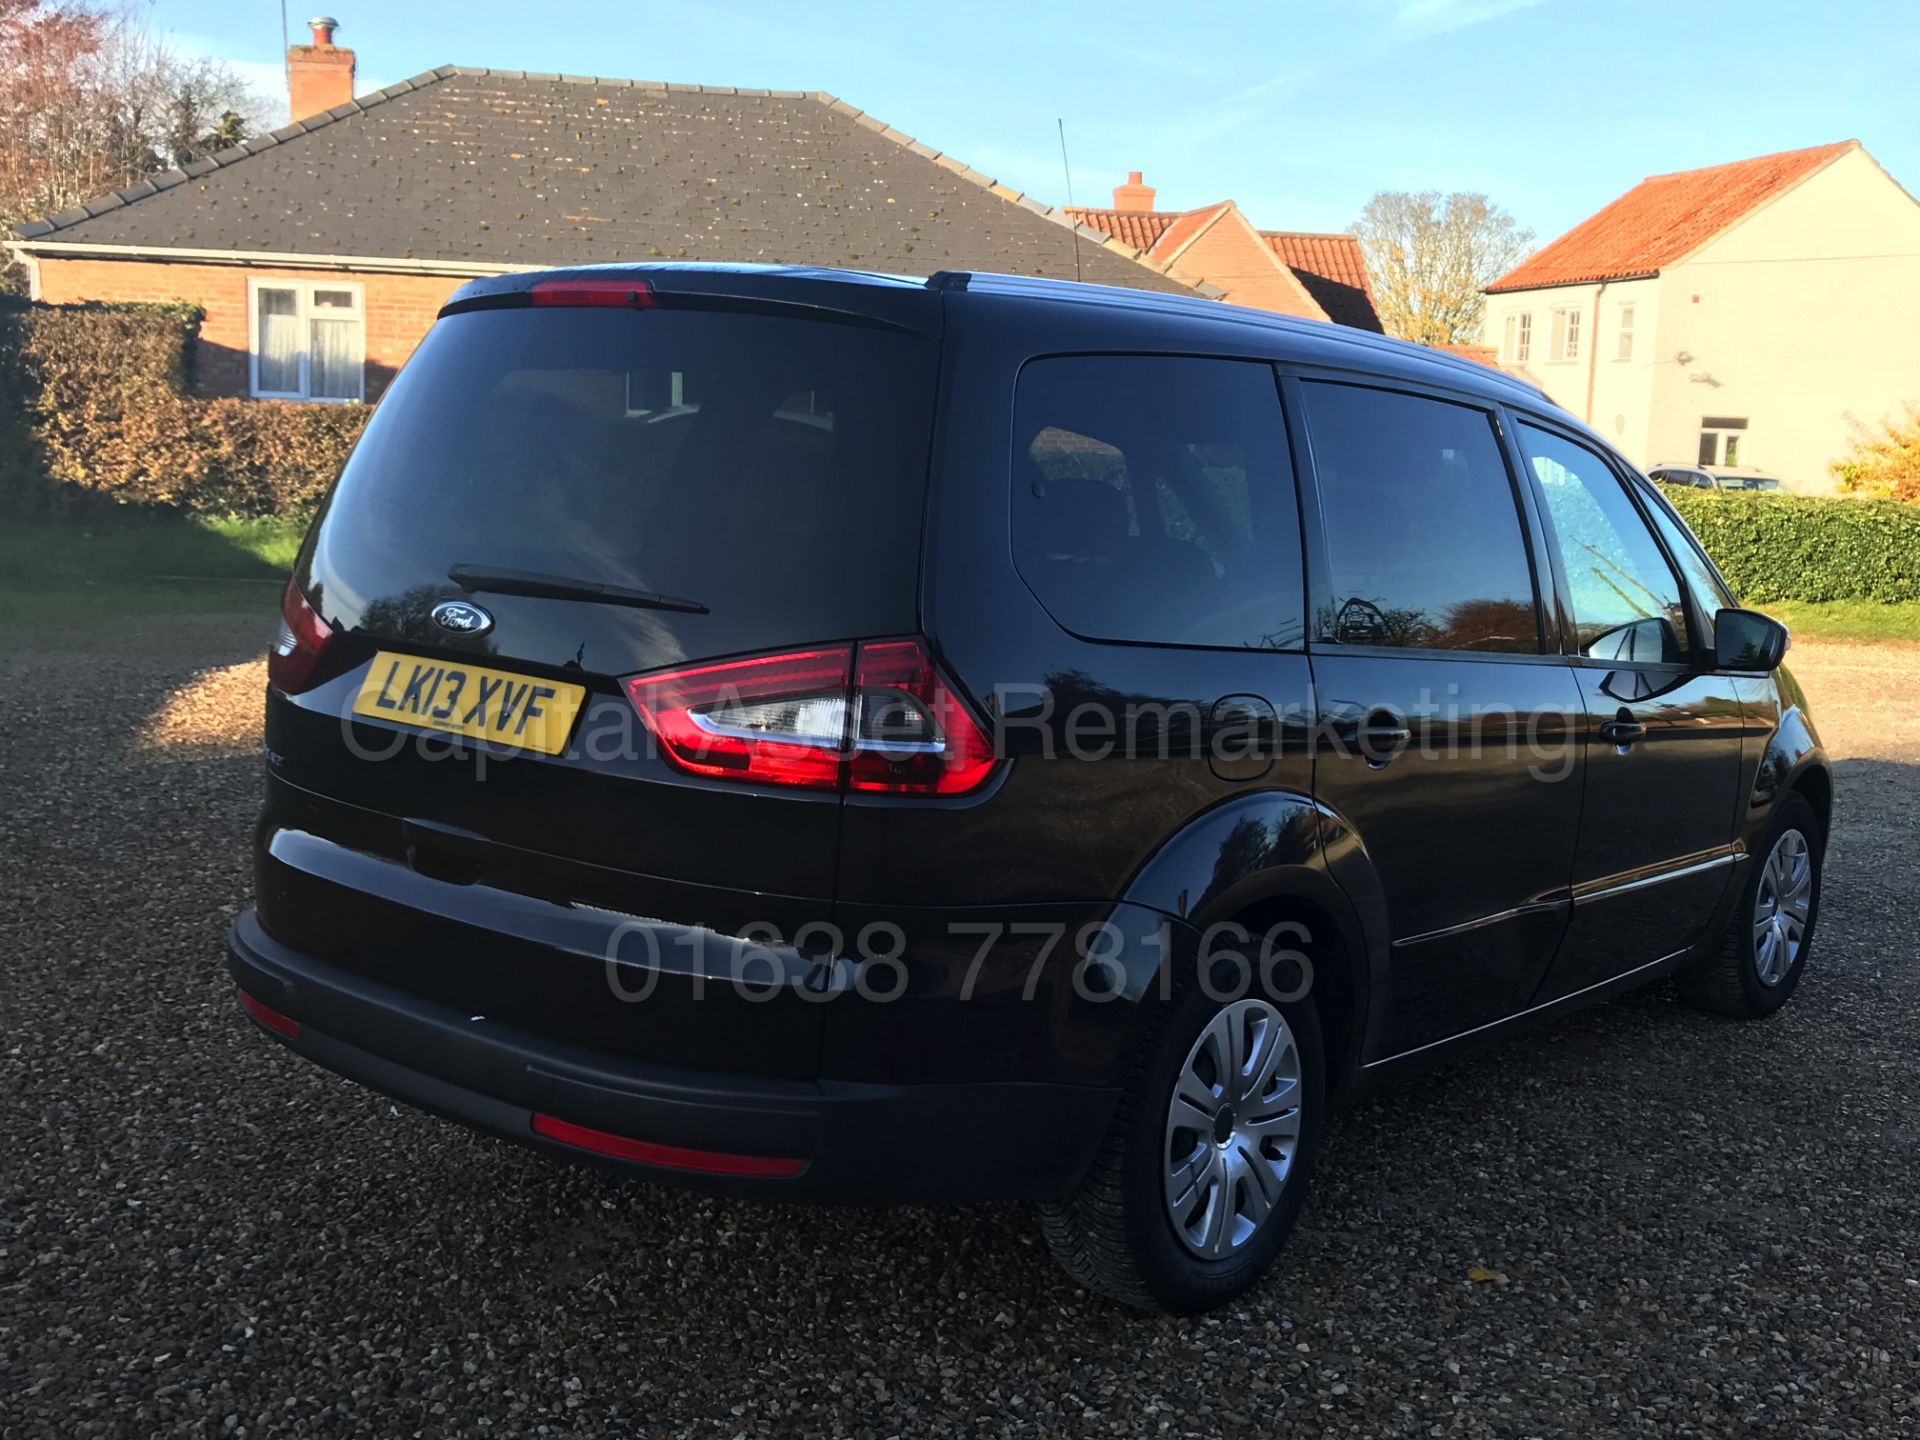 (On Sale) FORD GALAXY 'ZETEC' 7 SEATER MPV (2013) '2.0 TDCI -140 BHP' (1 OWNER) *FULL HISTORY* - Image 10 of 29